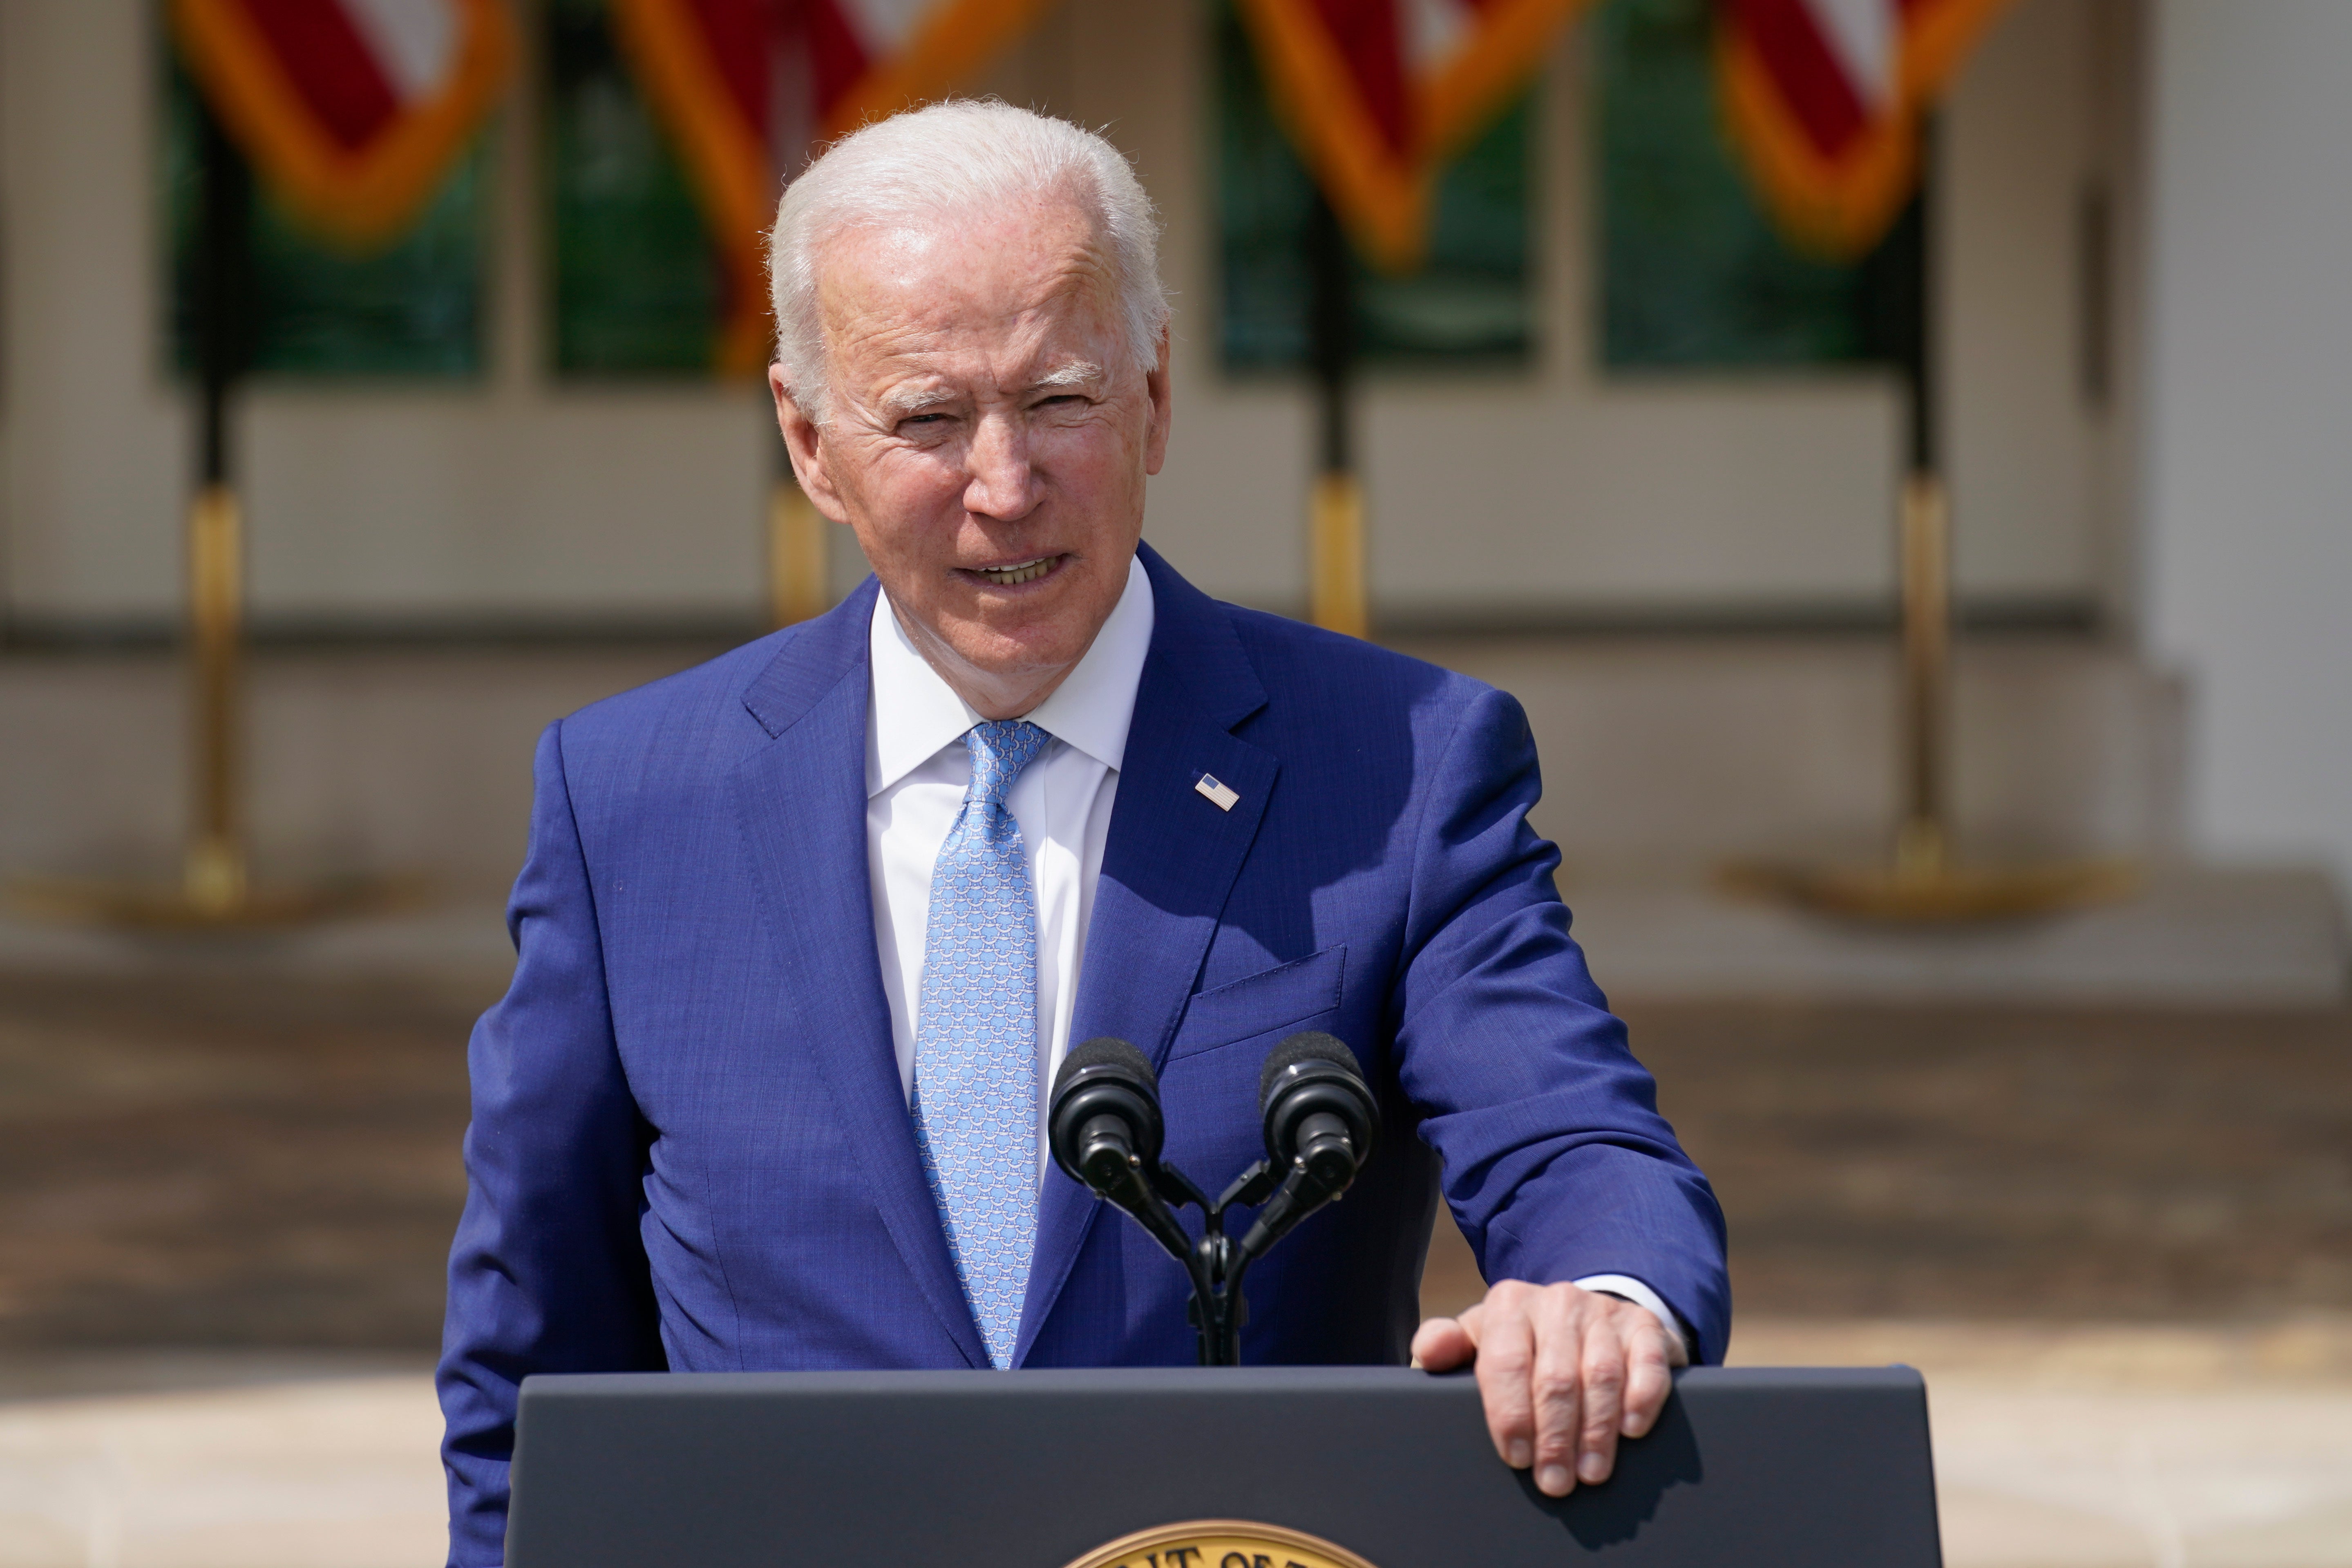 President Biden has signed an order establishing a commission to study potential Supreme Court reforms